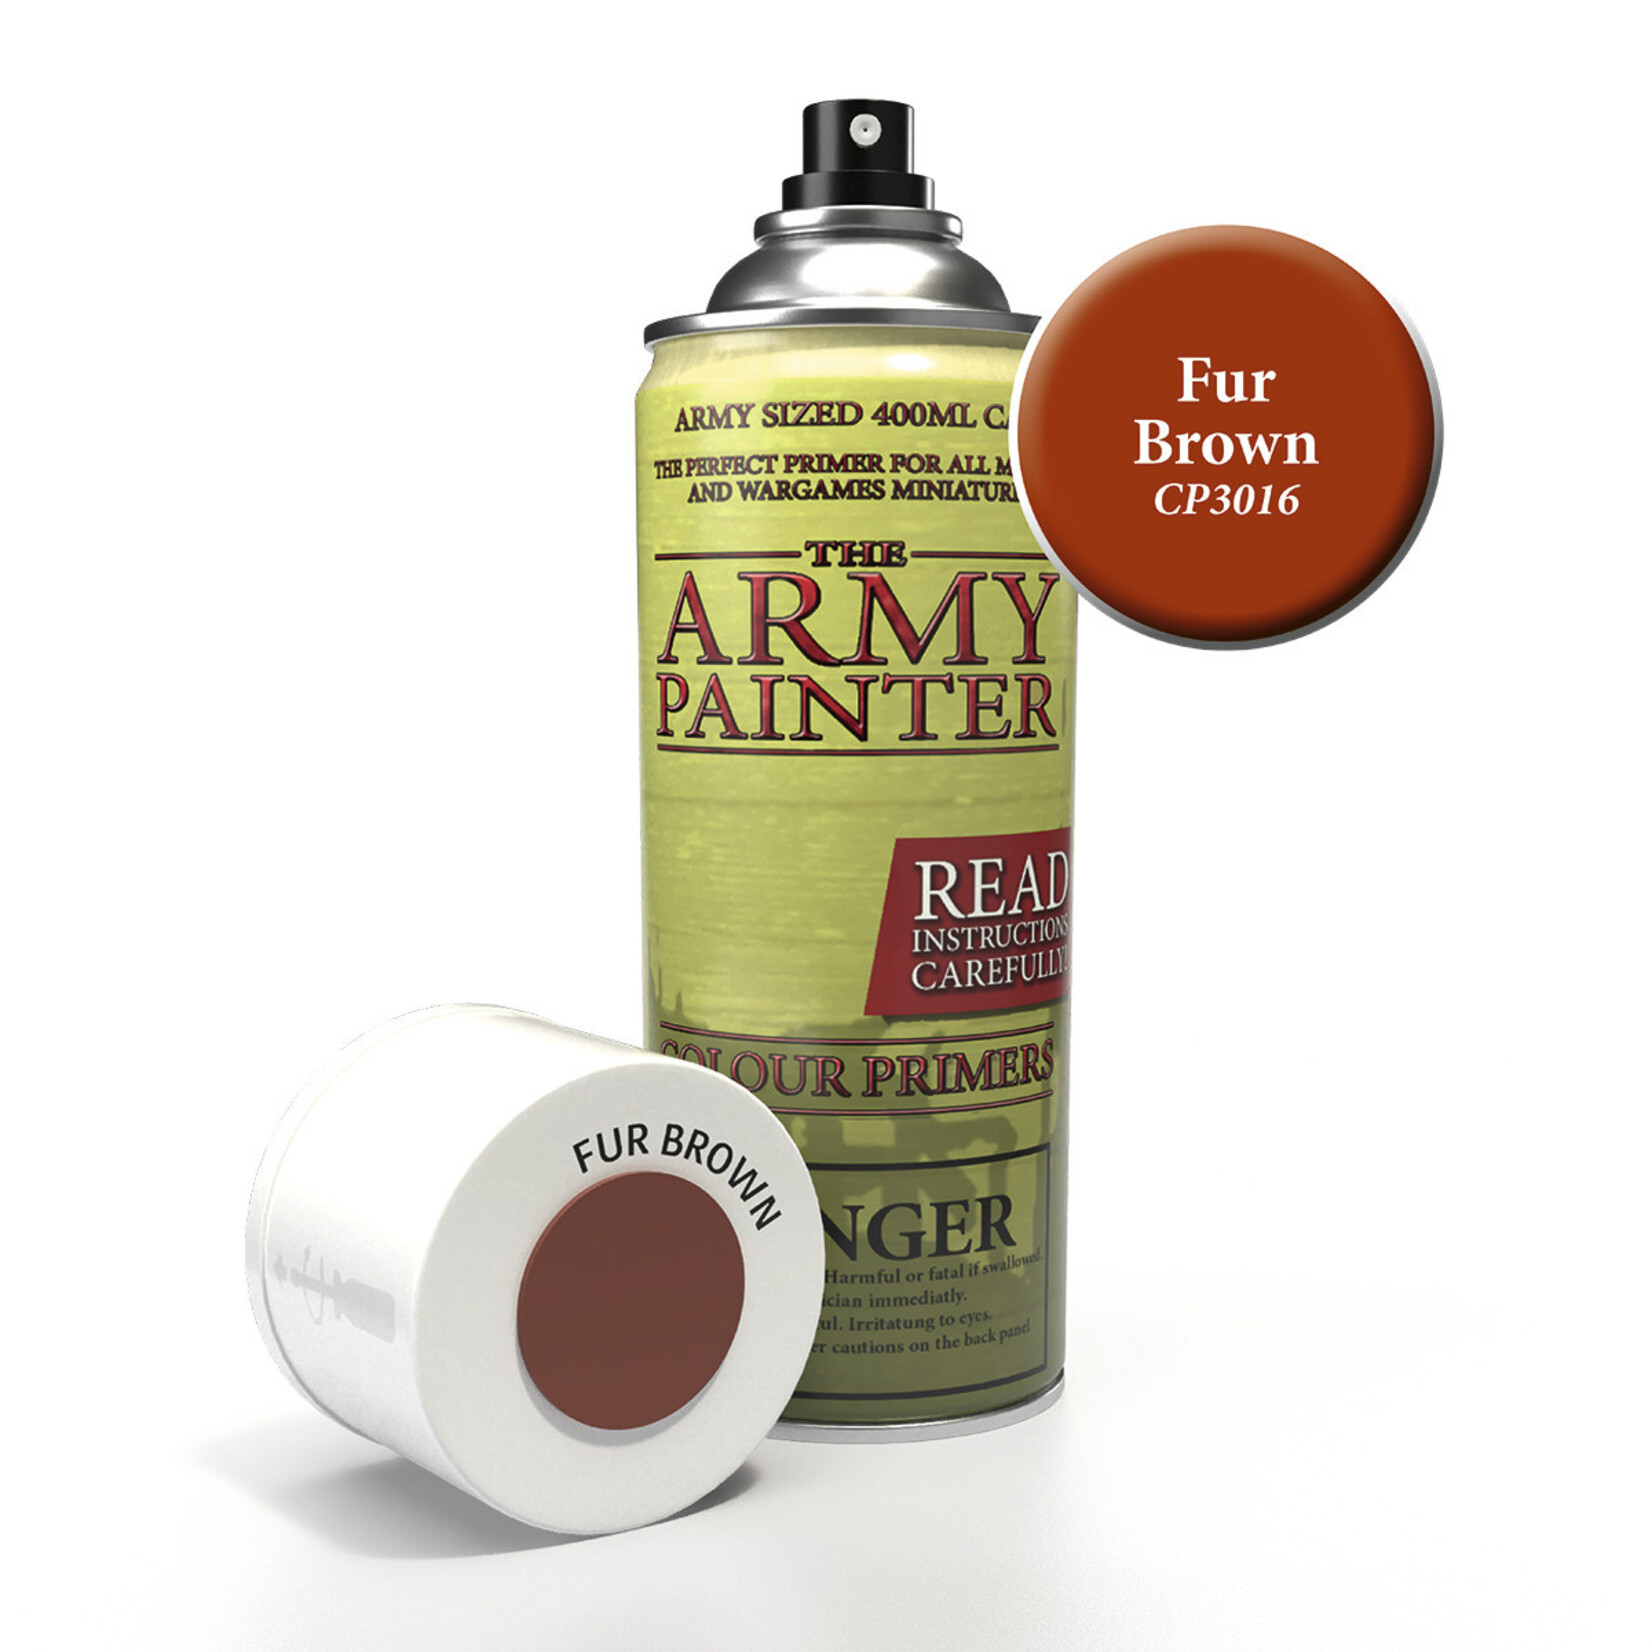 The Army Painter Color Primer Fur Brown